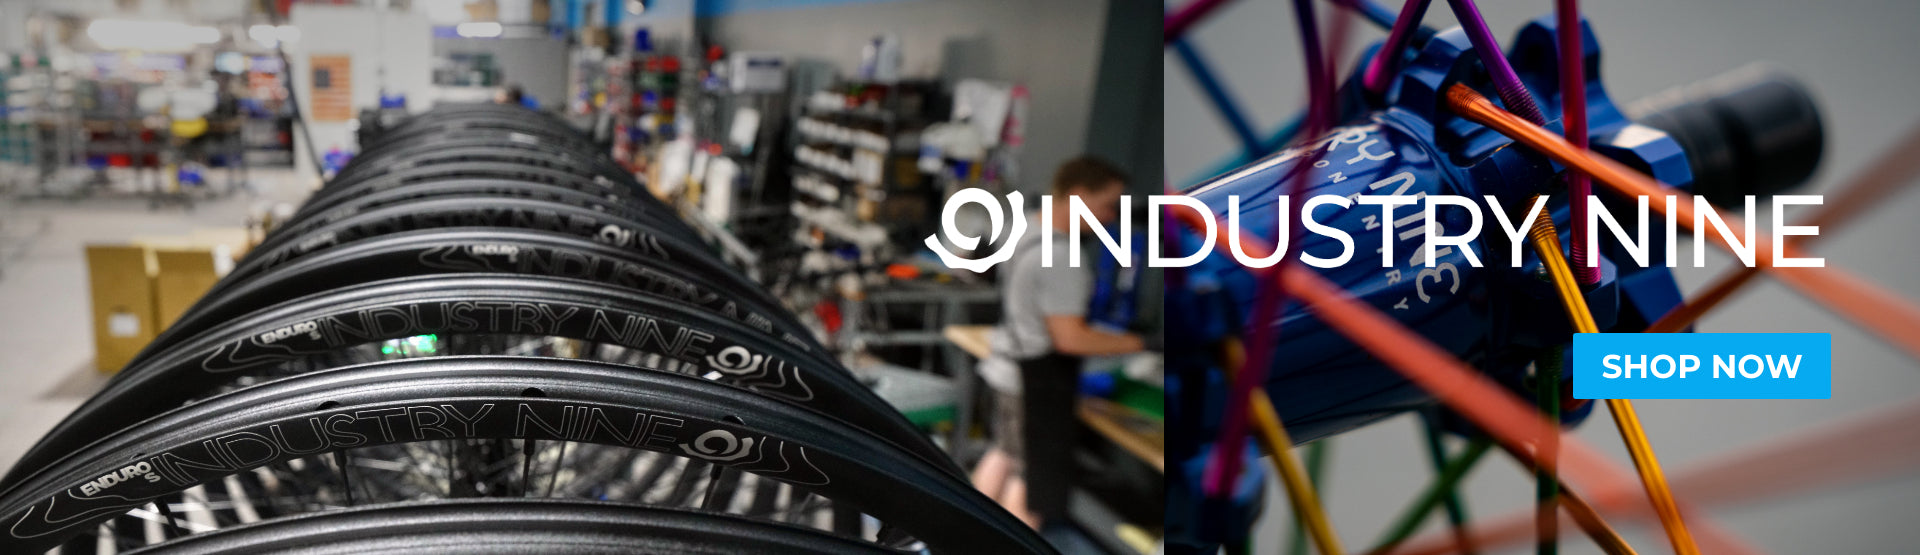 Bicycle Power Trading | Industry Nine Distribution Announcement